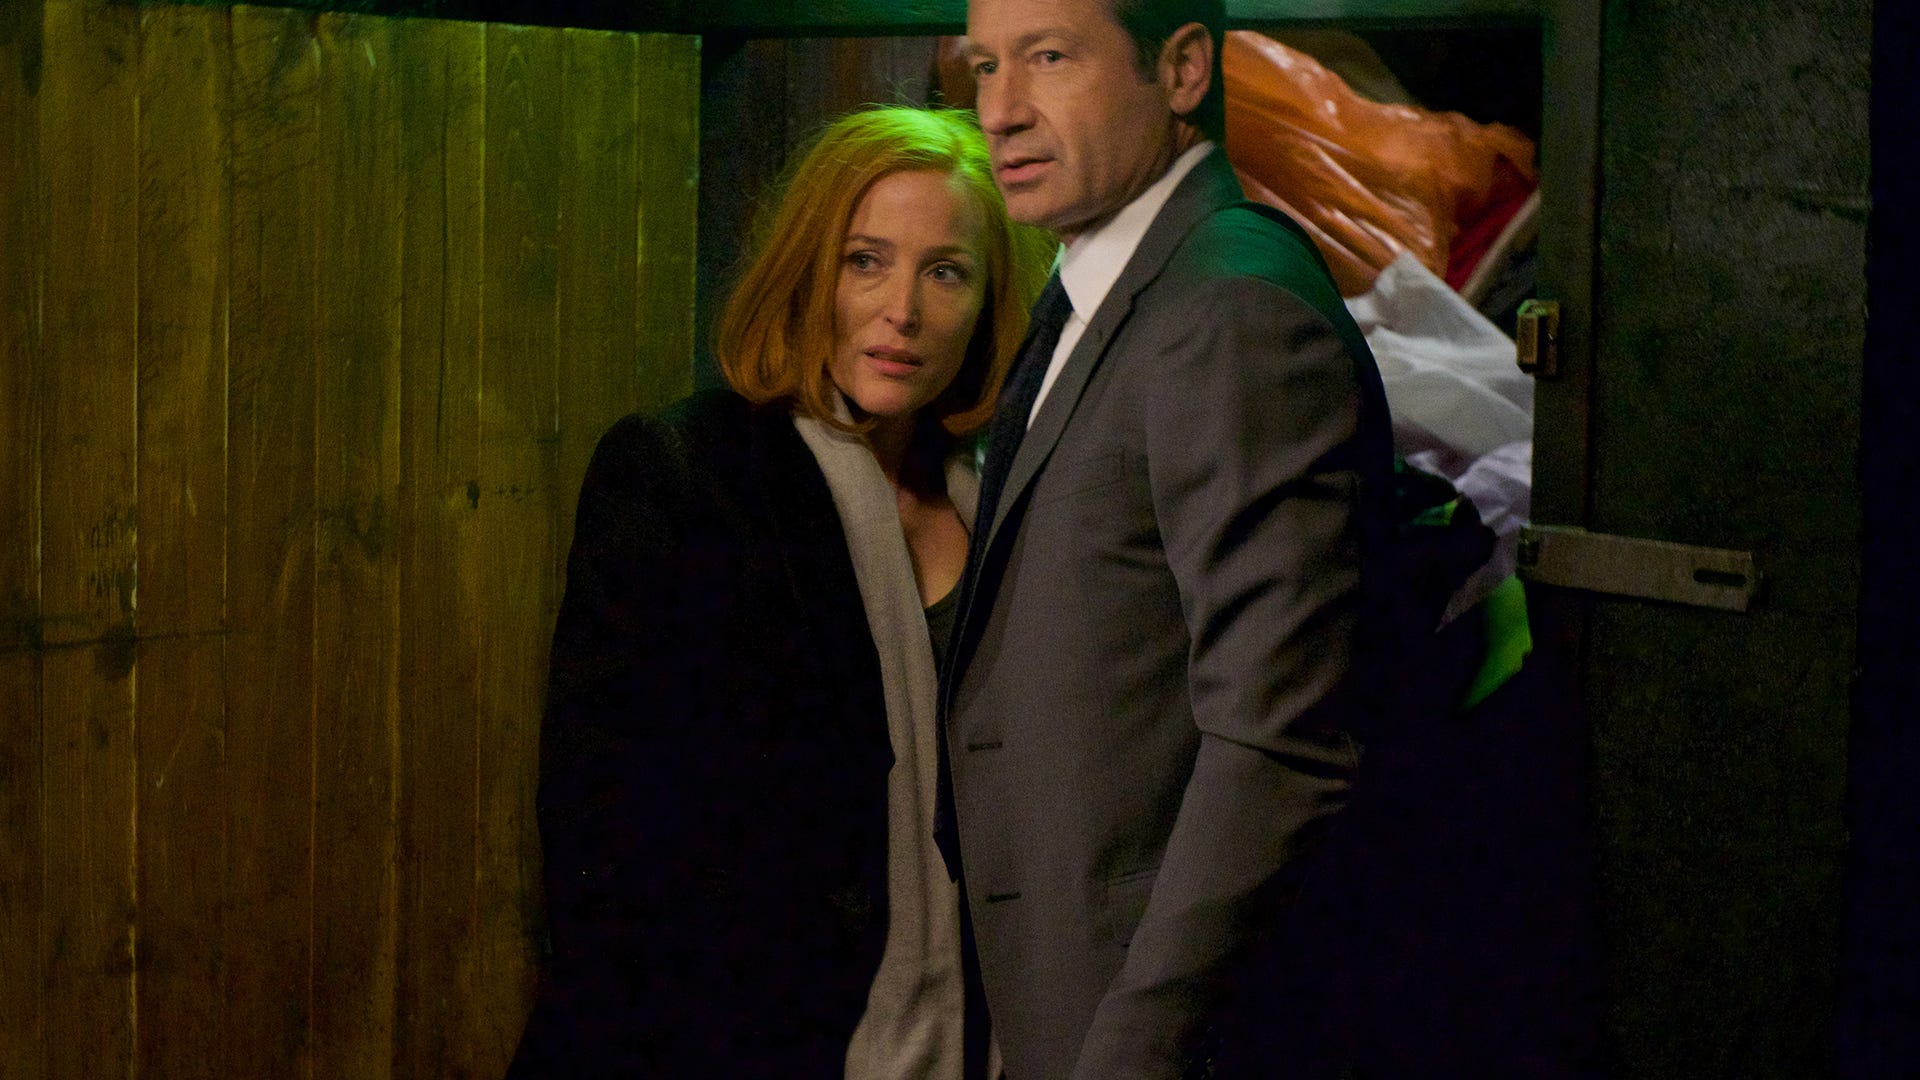 Gillian Anderson and David Duchovny, The X-Files